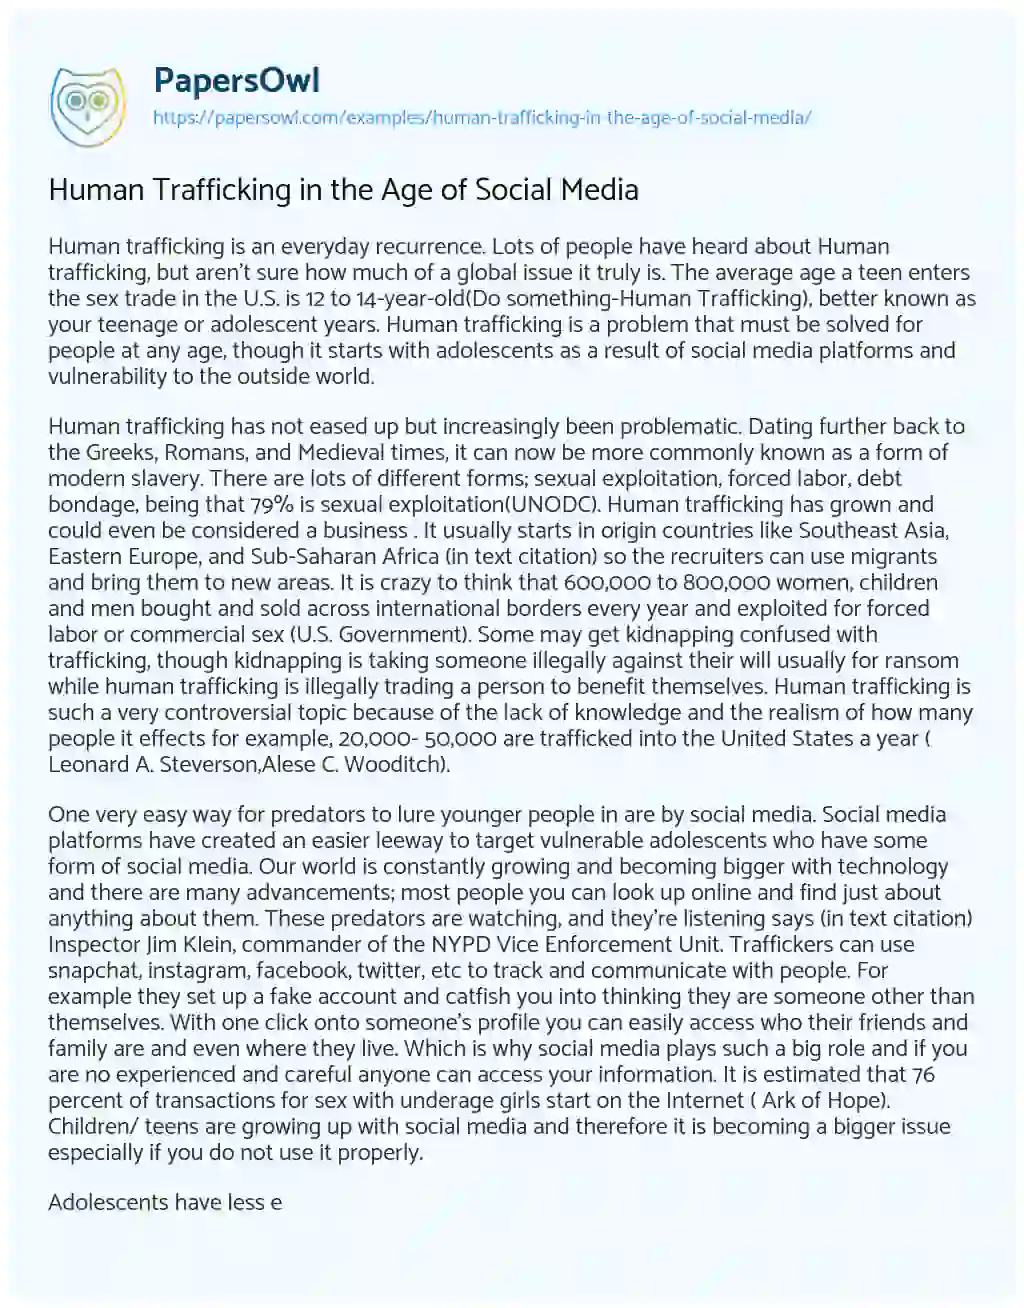 Human Trafficking in the Age of Social Media essay